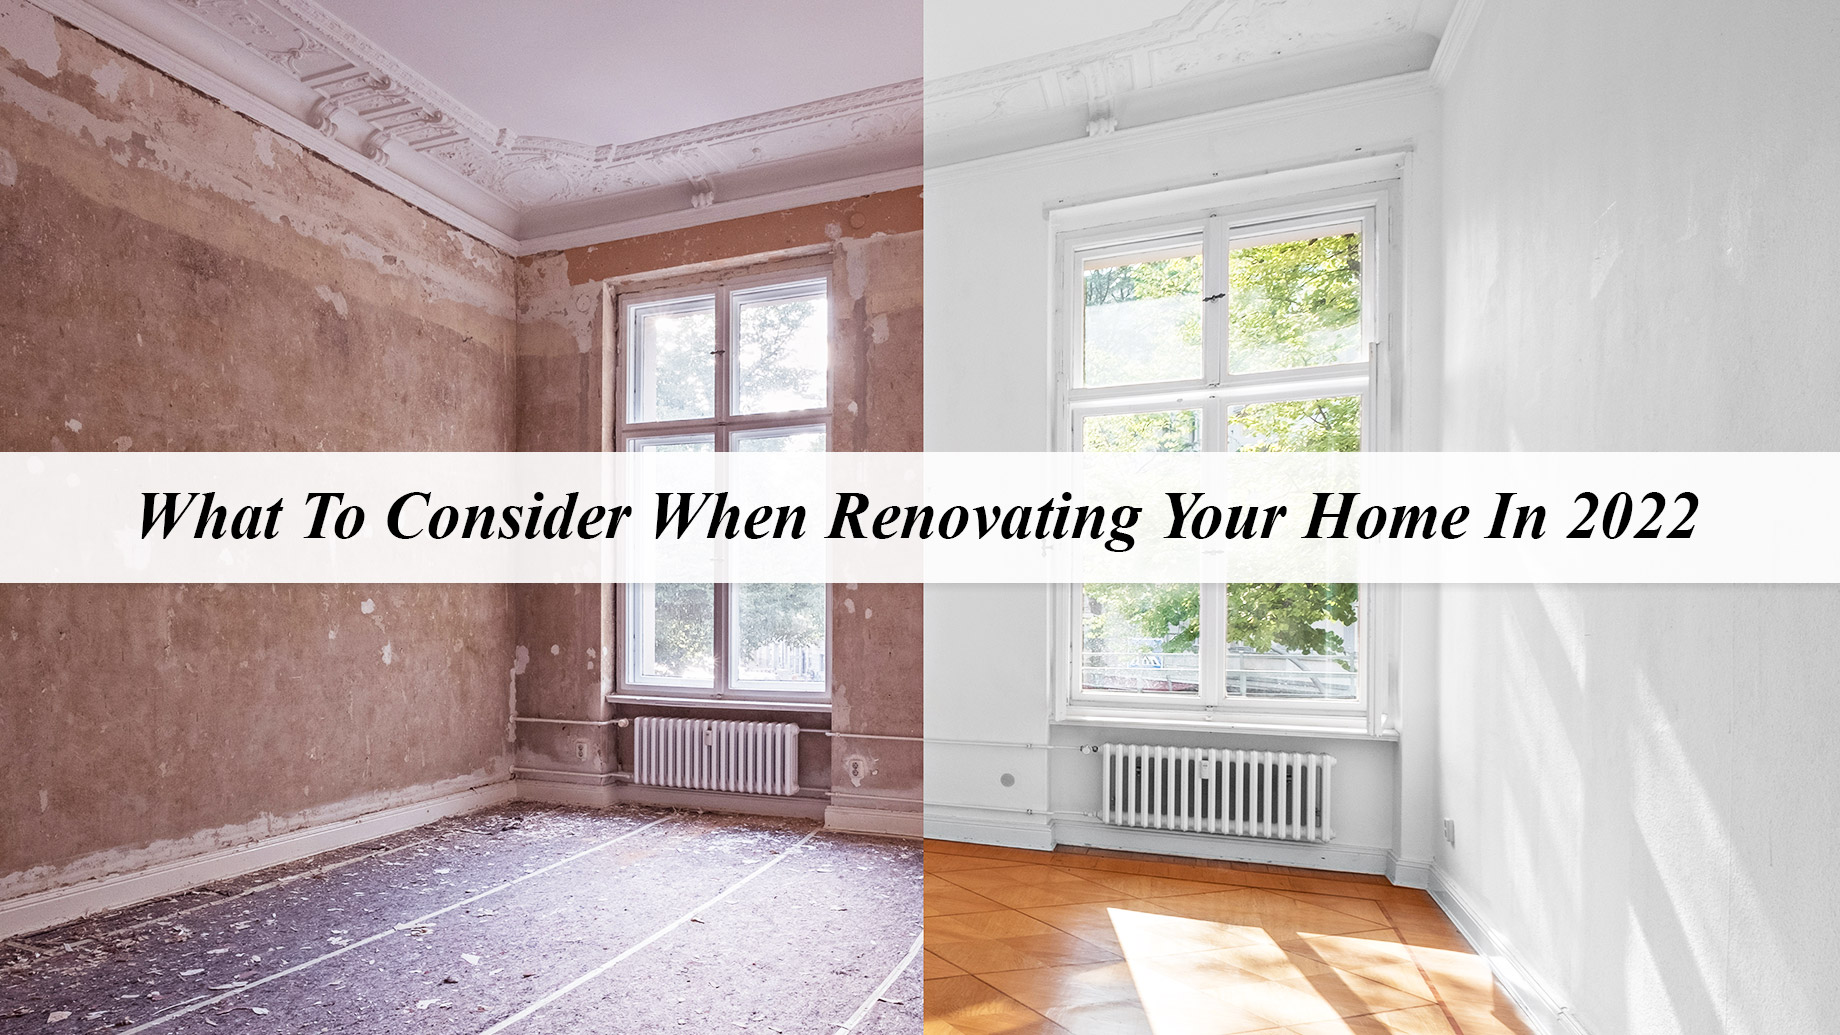 What To Consider When Renovating Your Home In 2022